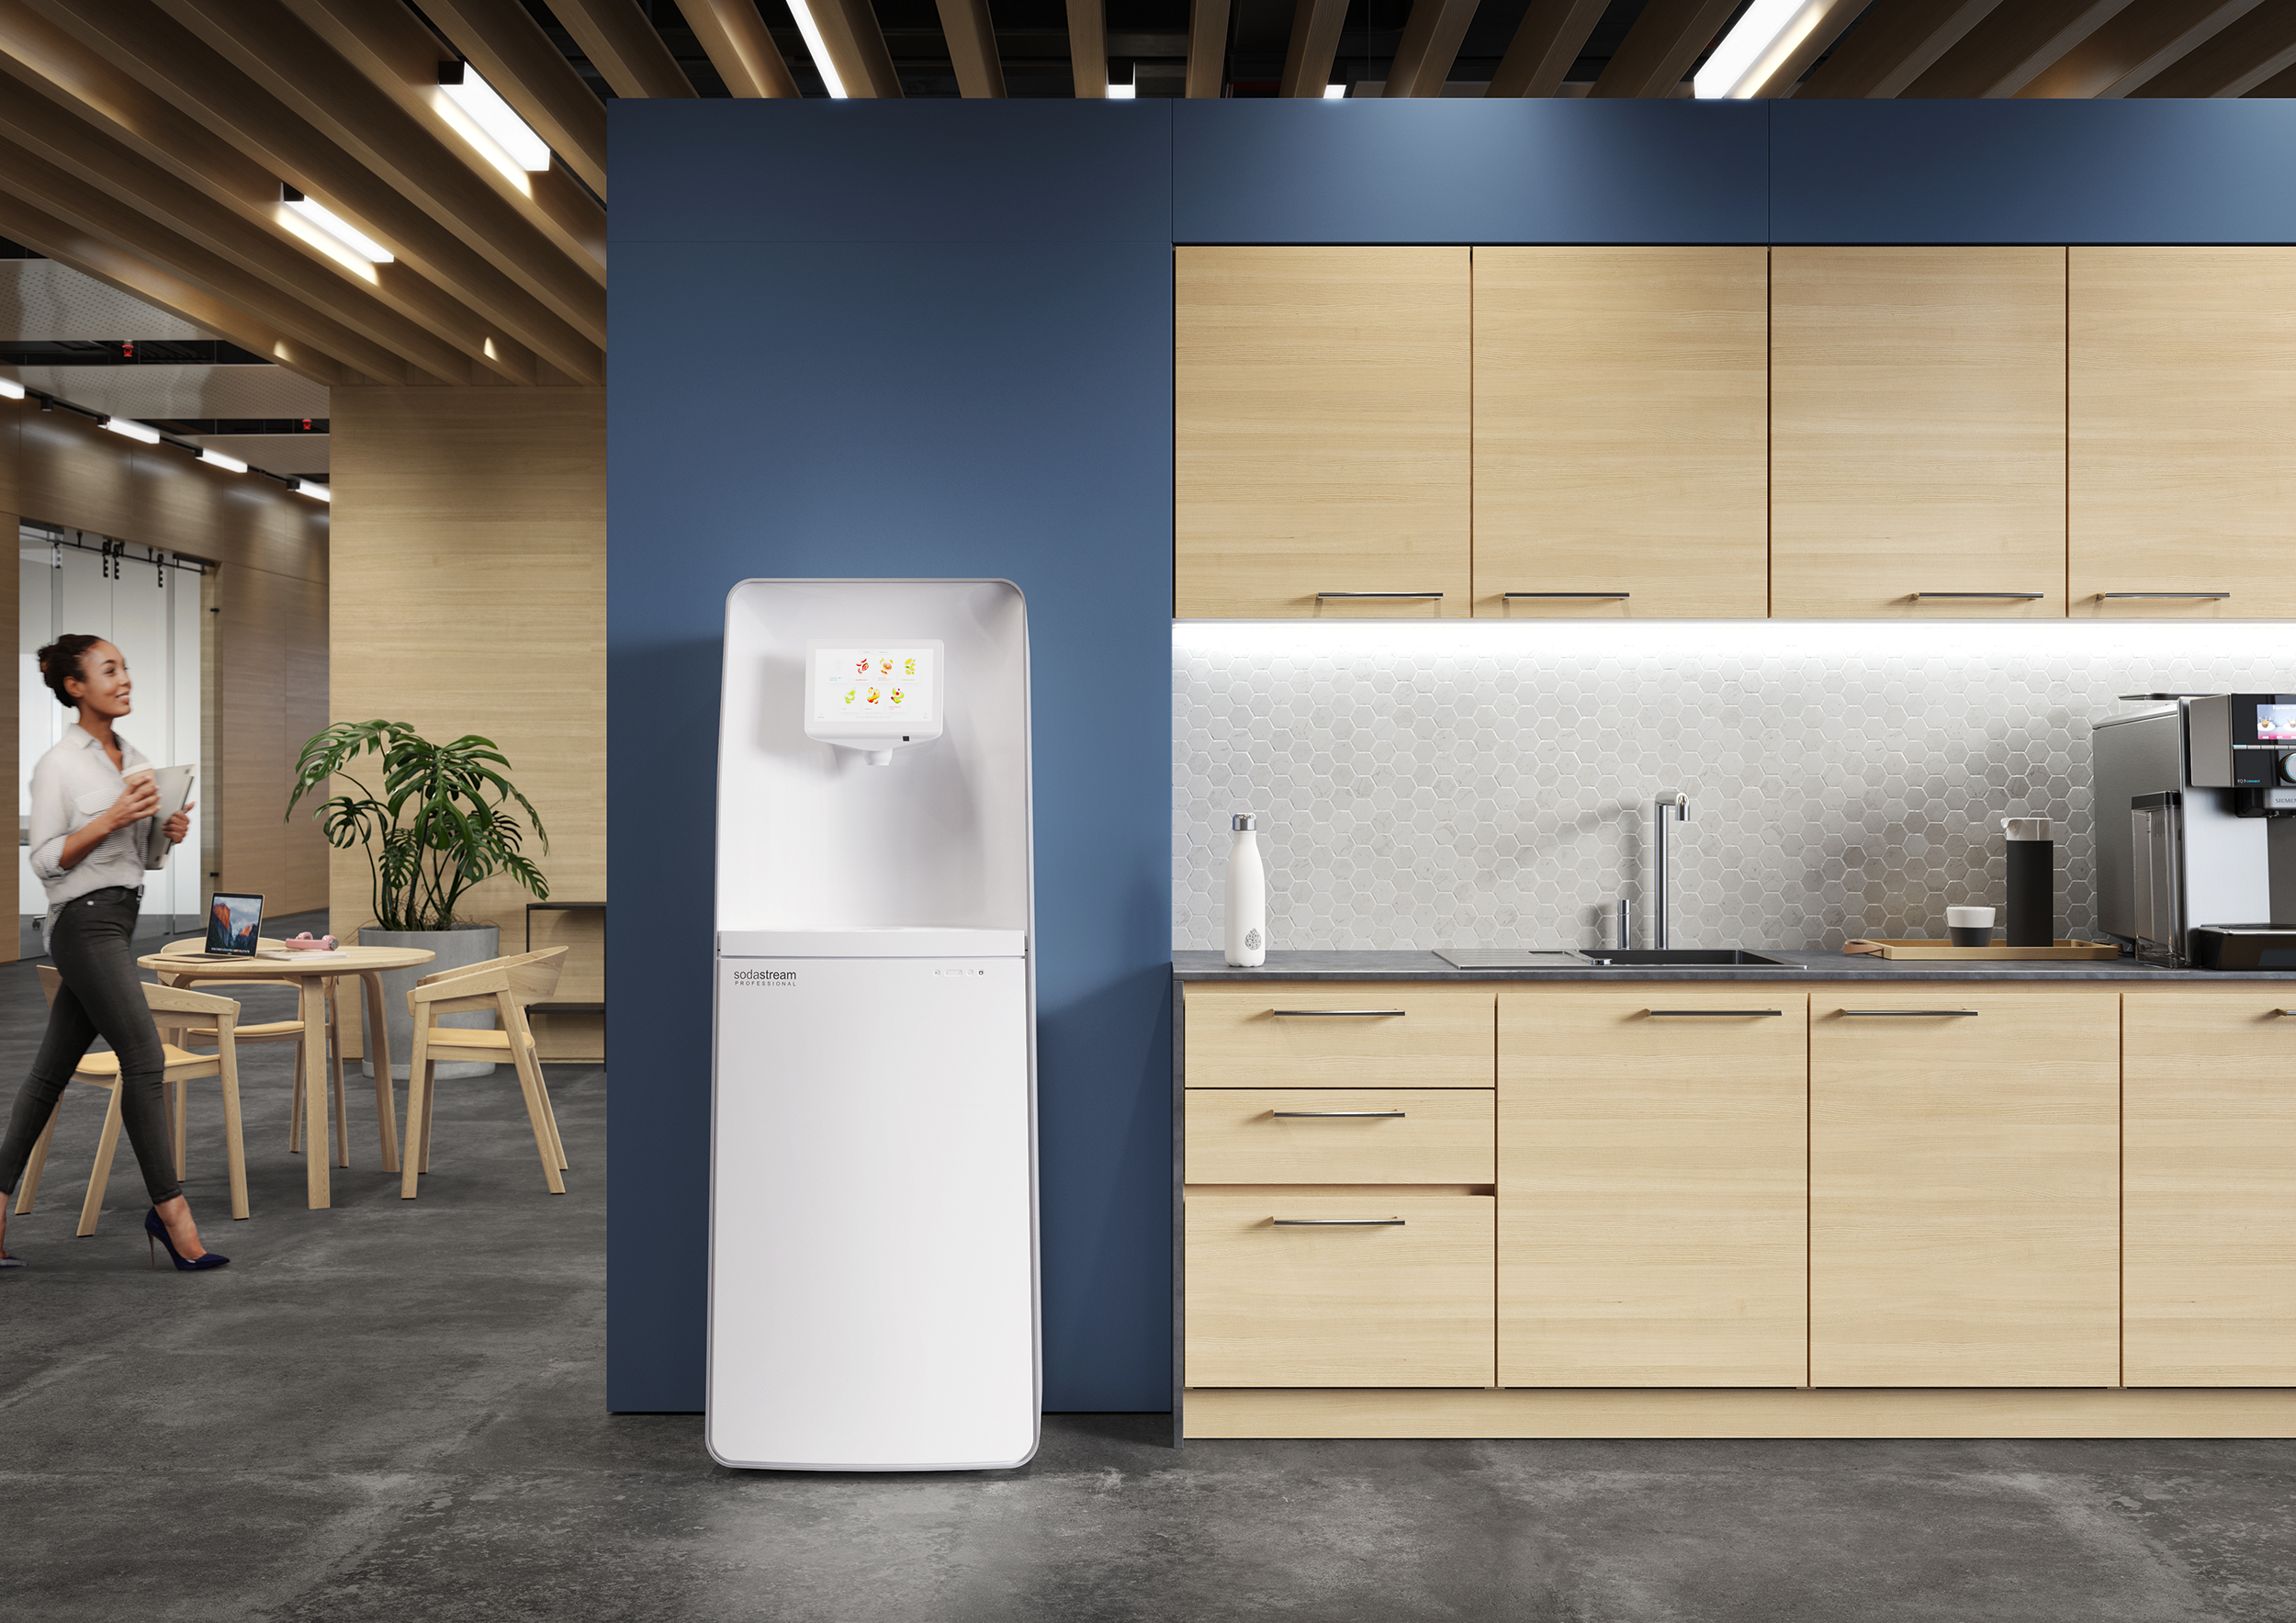 sodastream-workplace-image.png